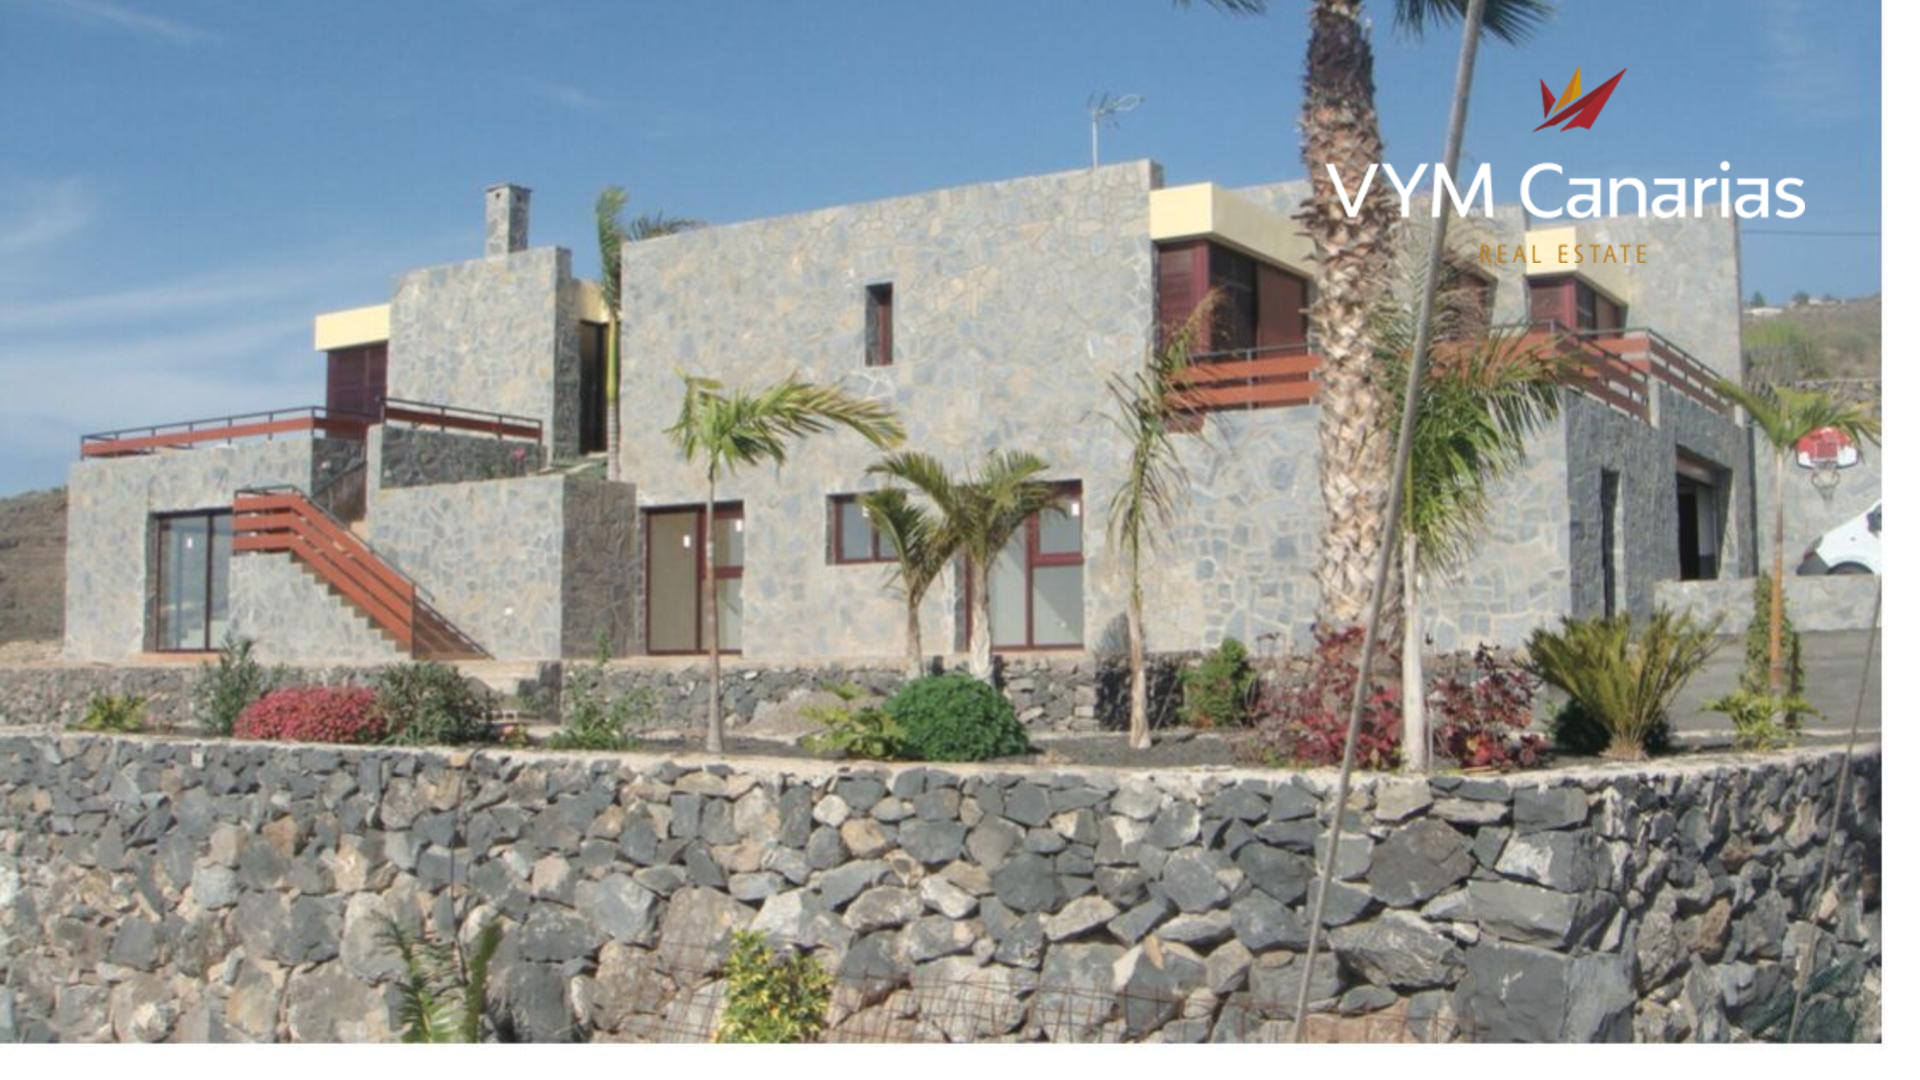 Villa in Taucho marketed by Vym Canarias